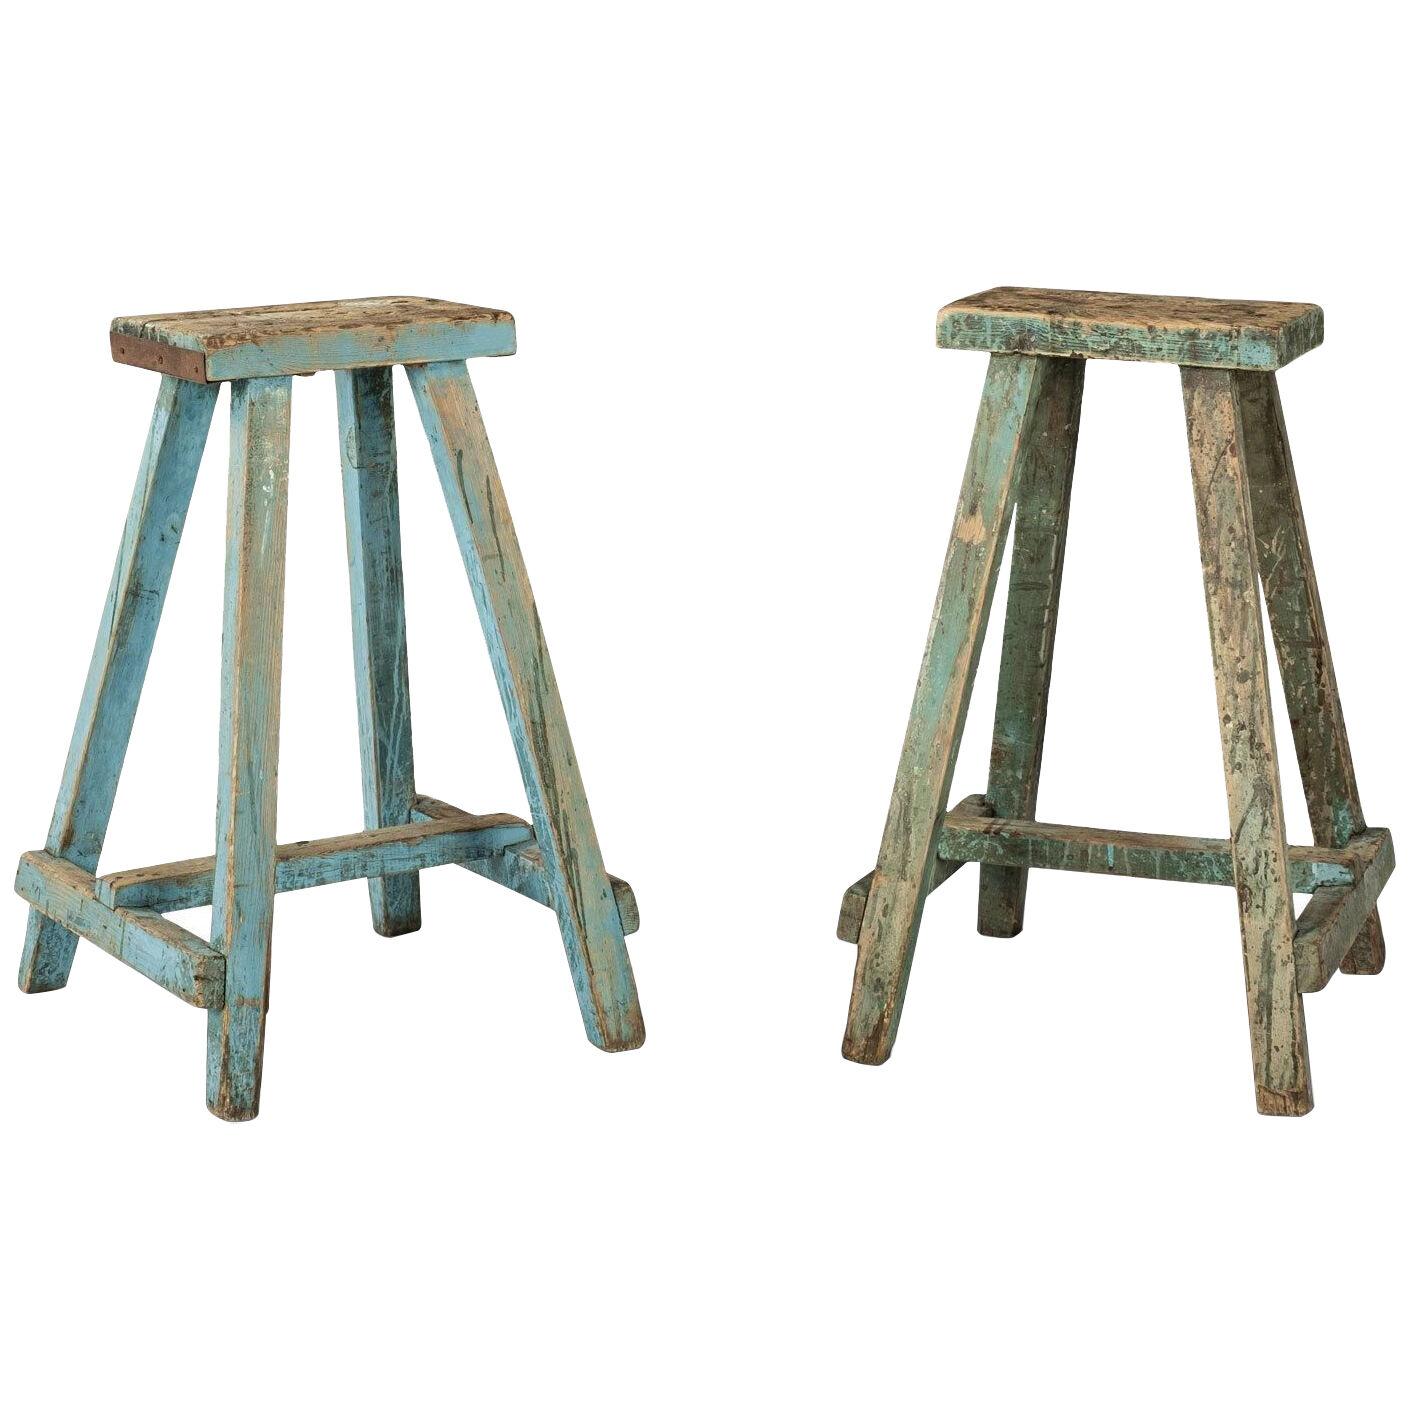 Pair of Rustic Blue Painted Side Tables